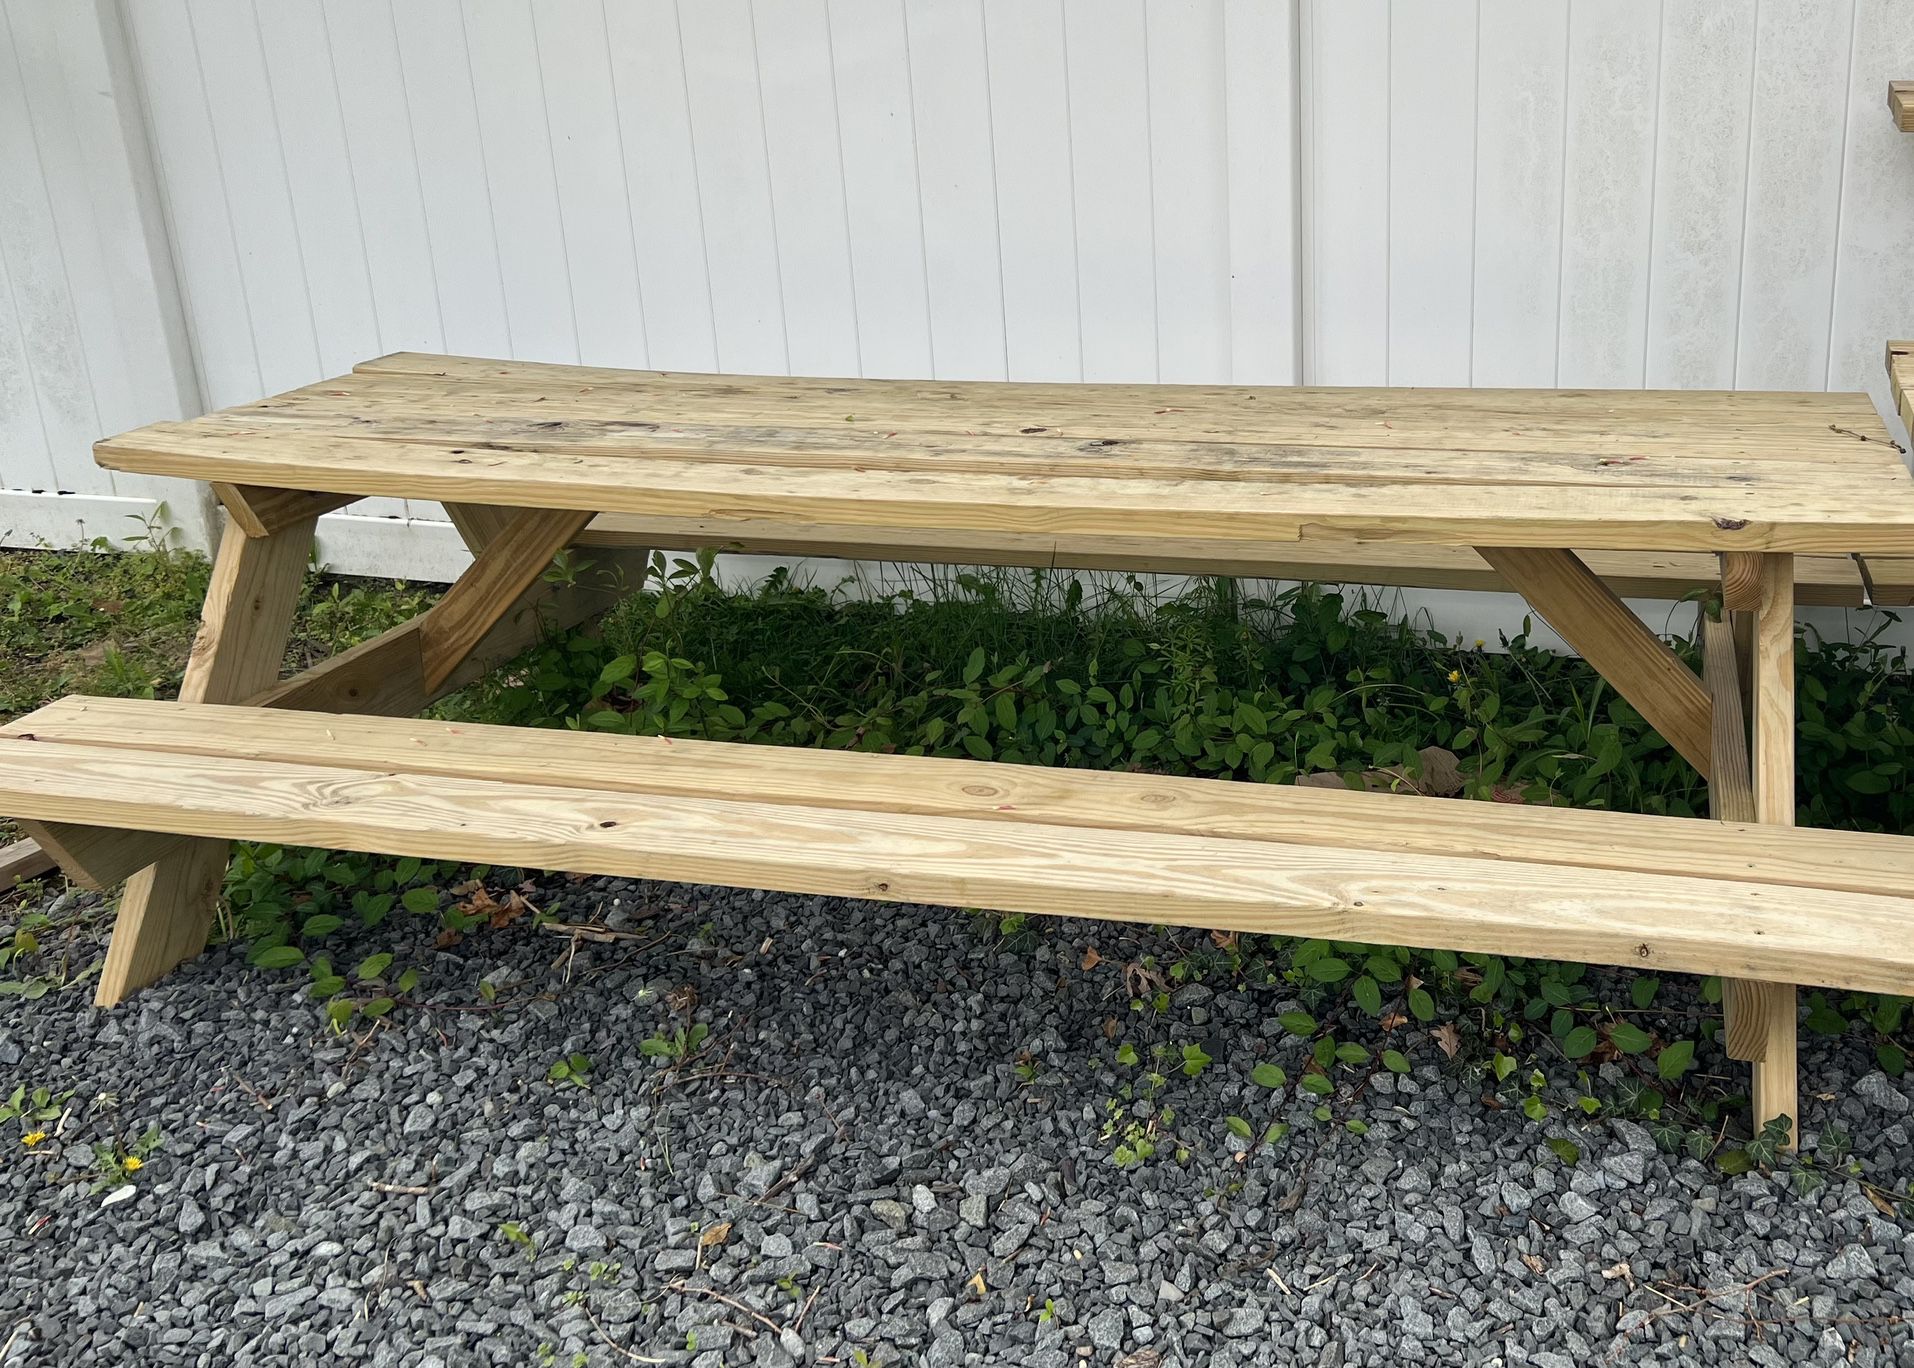 Large Heavy duty Wooden Picnic Tables $250 Each OBO